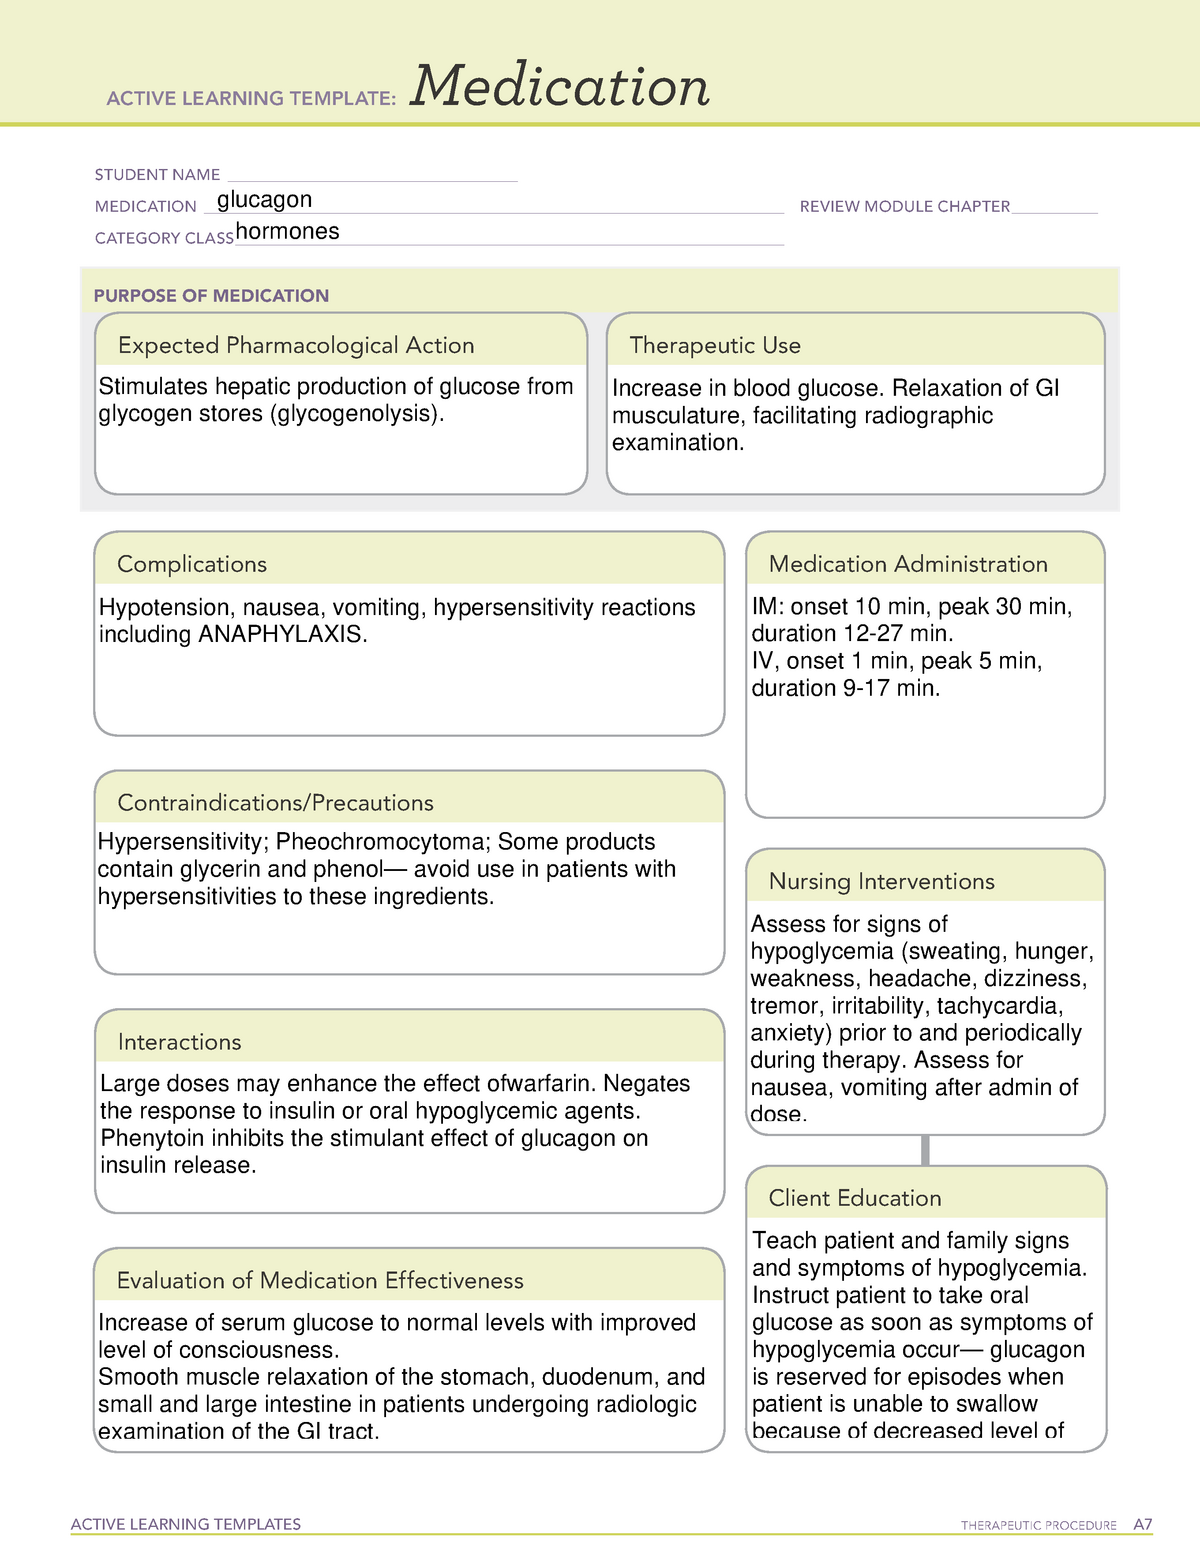 Glucagon Med card ACTIVE LEARNING TEMPLATES THERAPEUTIC PROCEDURE A